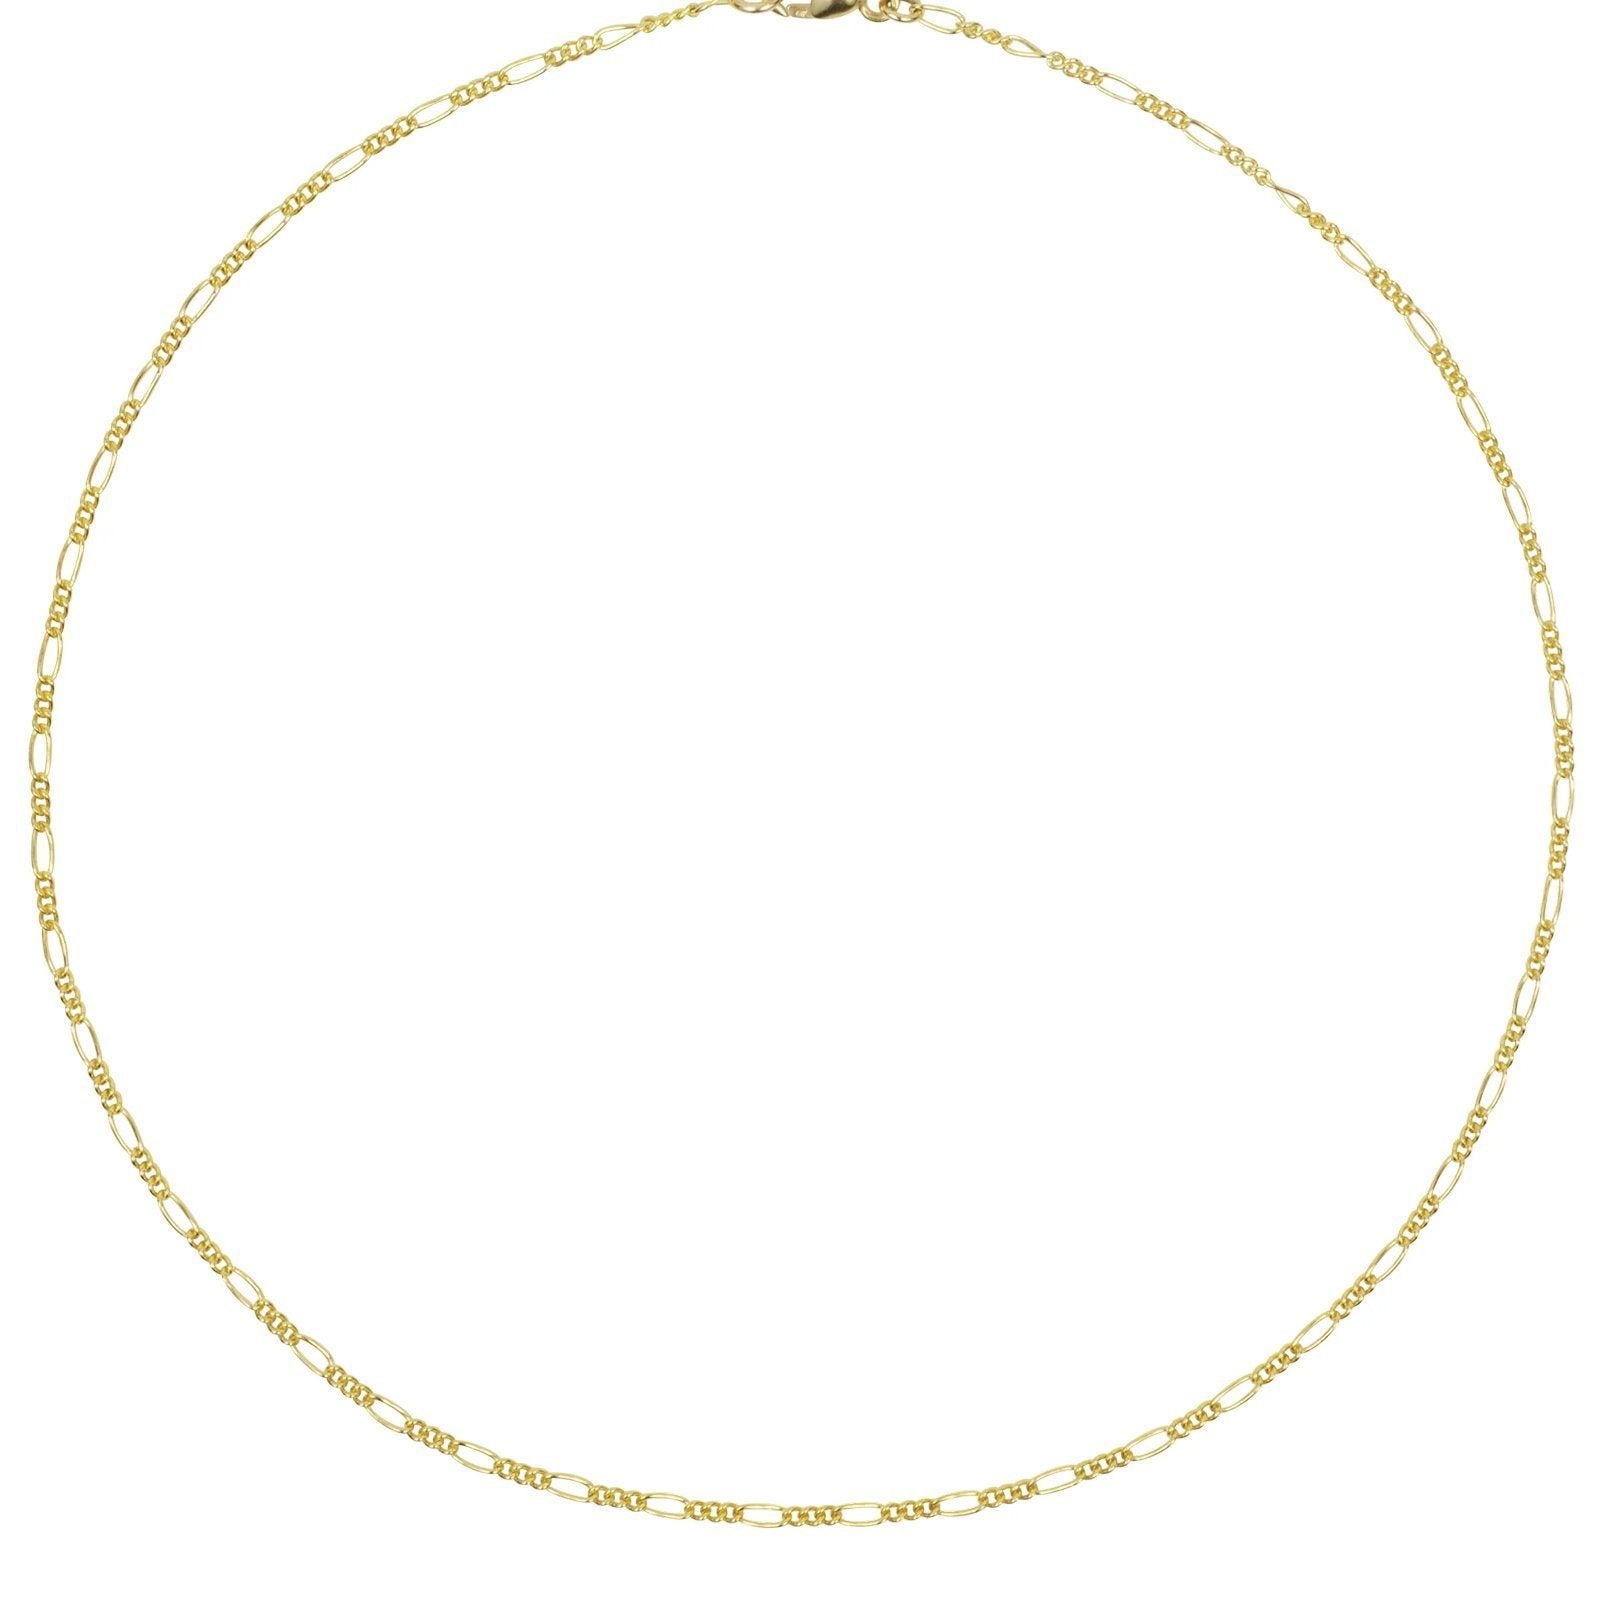 The Figaro Chain Choker Necklace. Easy, effortless, refined. We love our dainty chain necklaces. They can be worn on their own for a minimal look or layered with your other pieces for more of a statement.   Handmade in California by Katie Dean Jewelry.